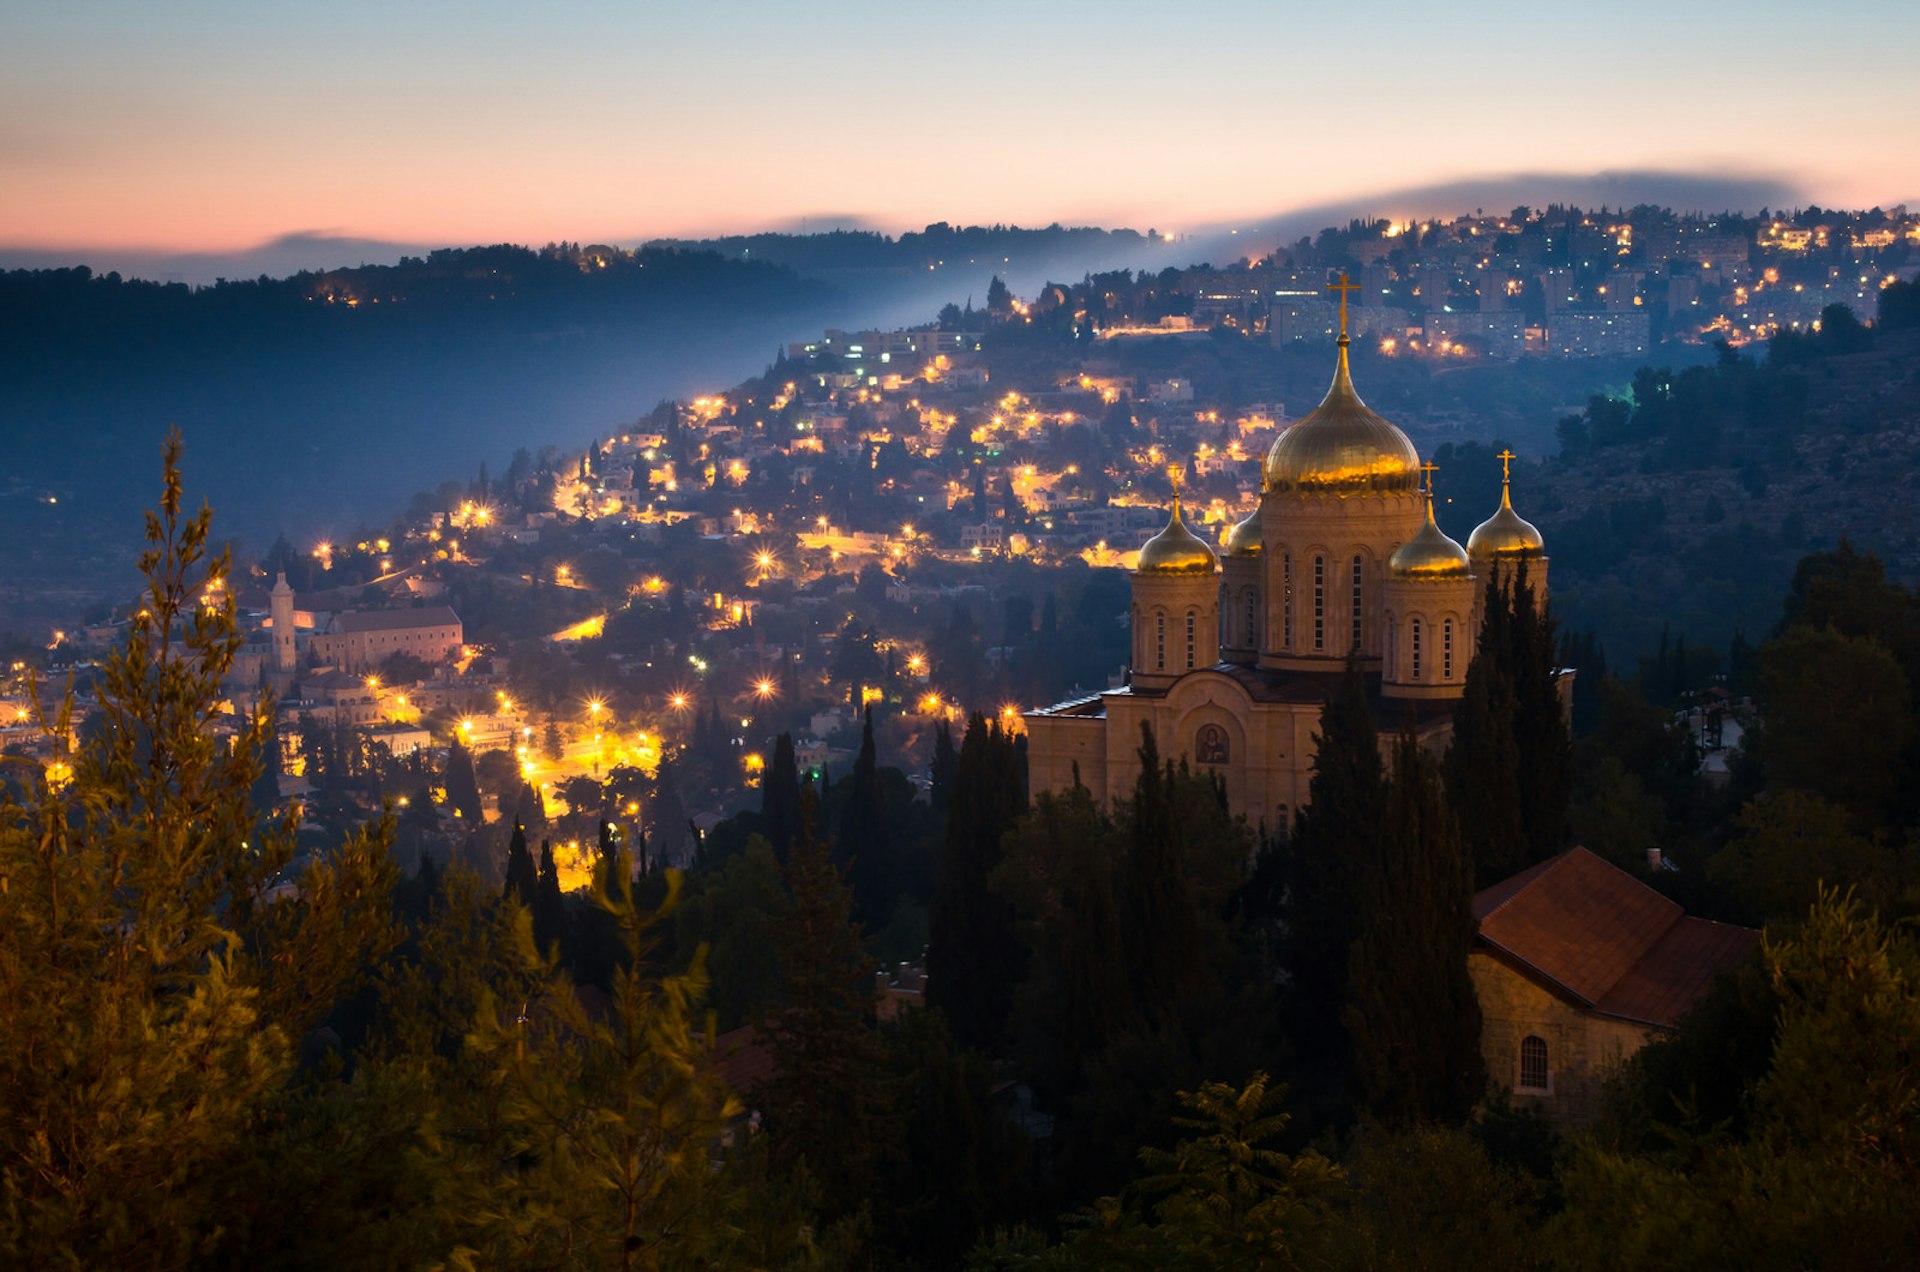 Russian Gorny Monastery at night in Ein Kerem district of Jerusalem. Image by Ilan Shacham / Getty Images